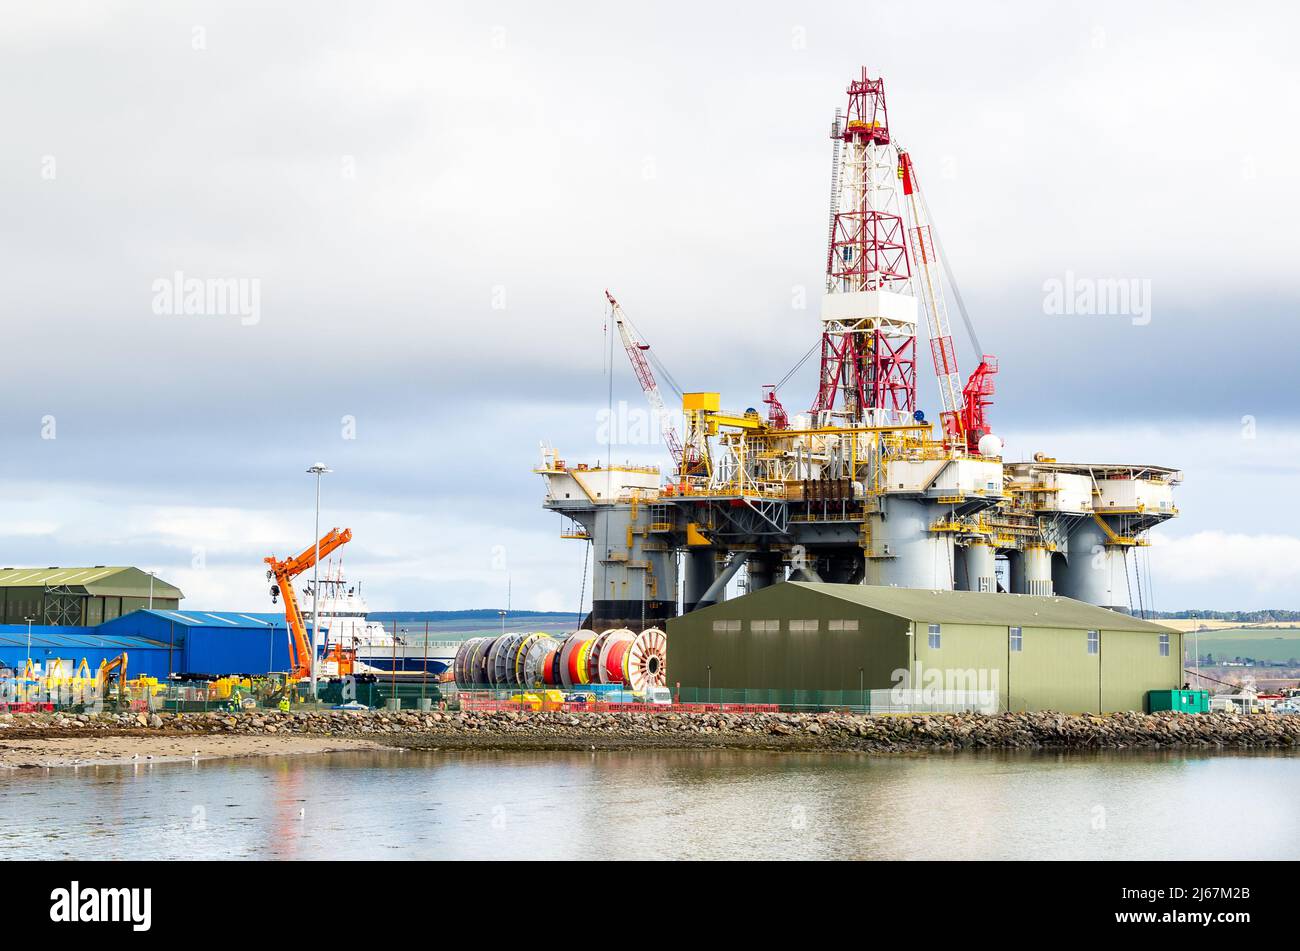 Oil platform in a dry dock for maintenance on a cloudy winter day Stock Photo